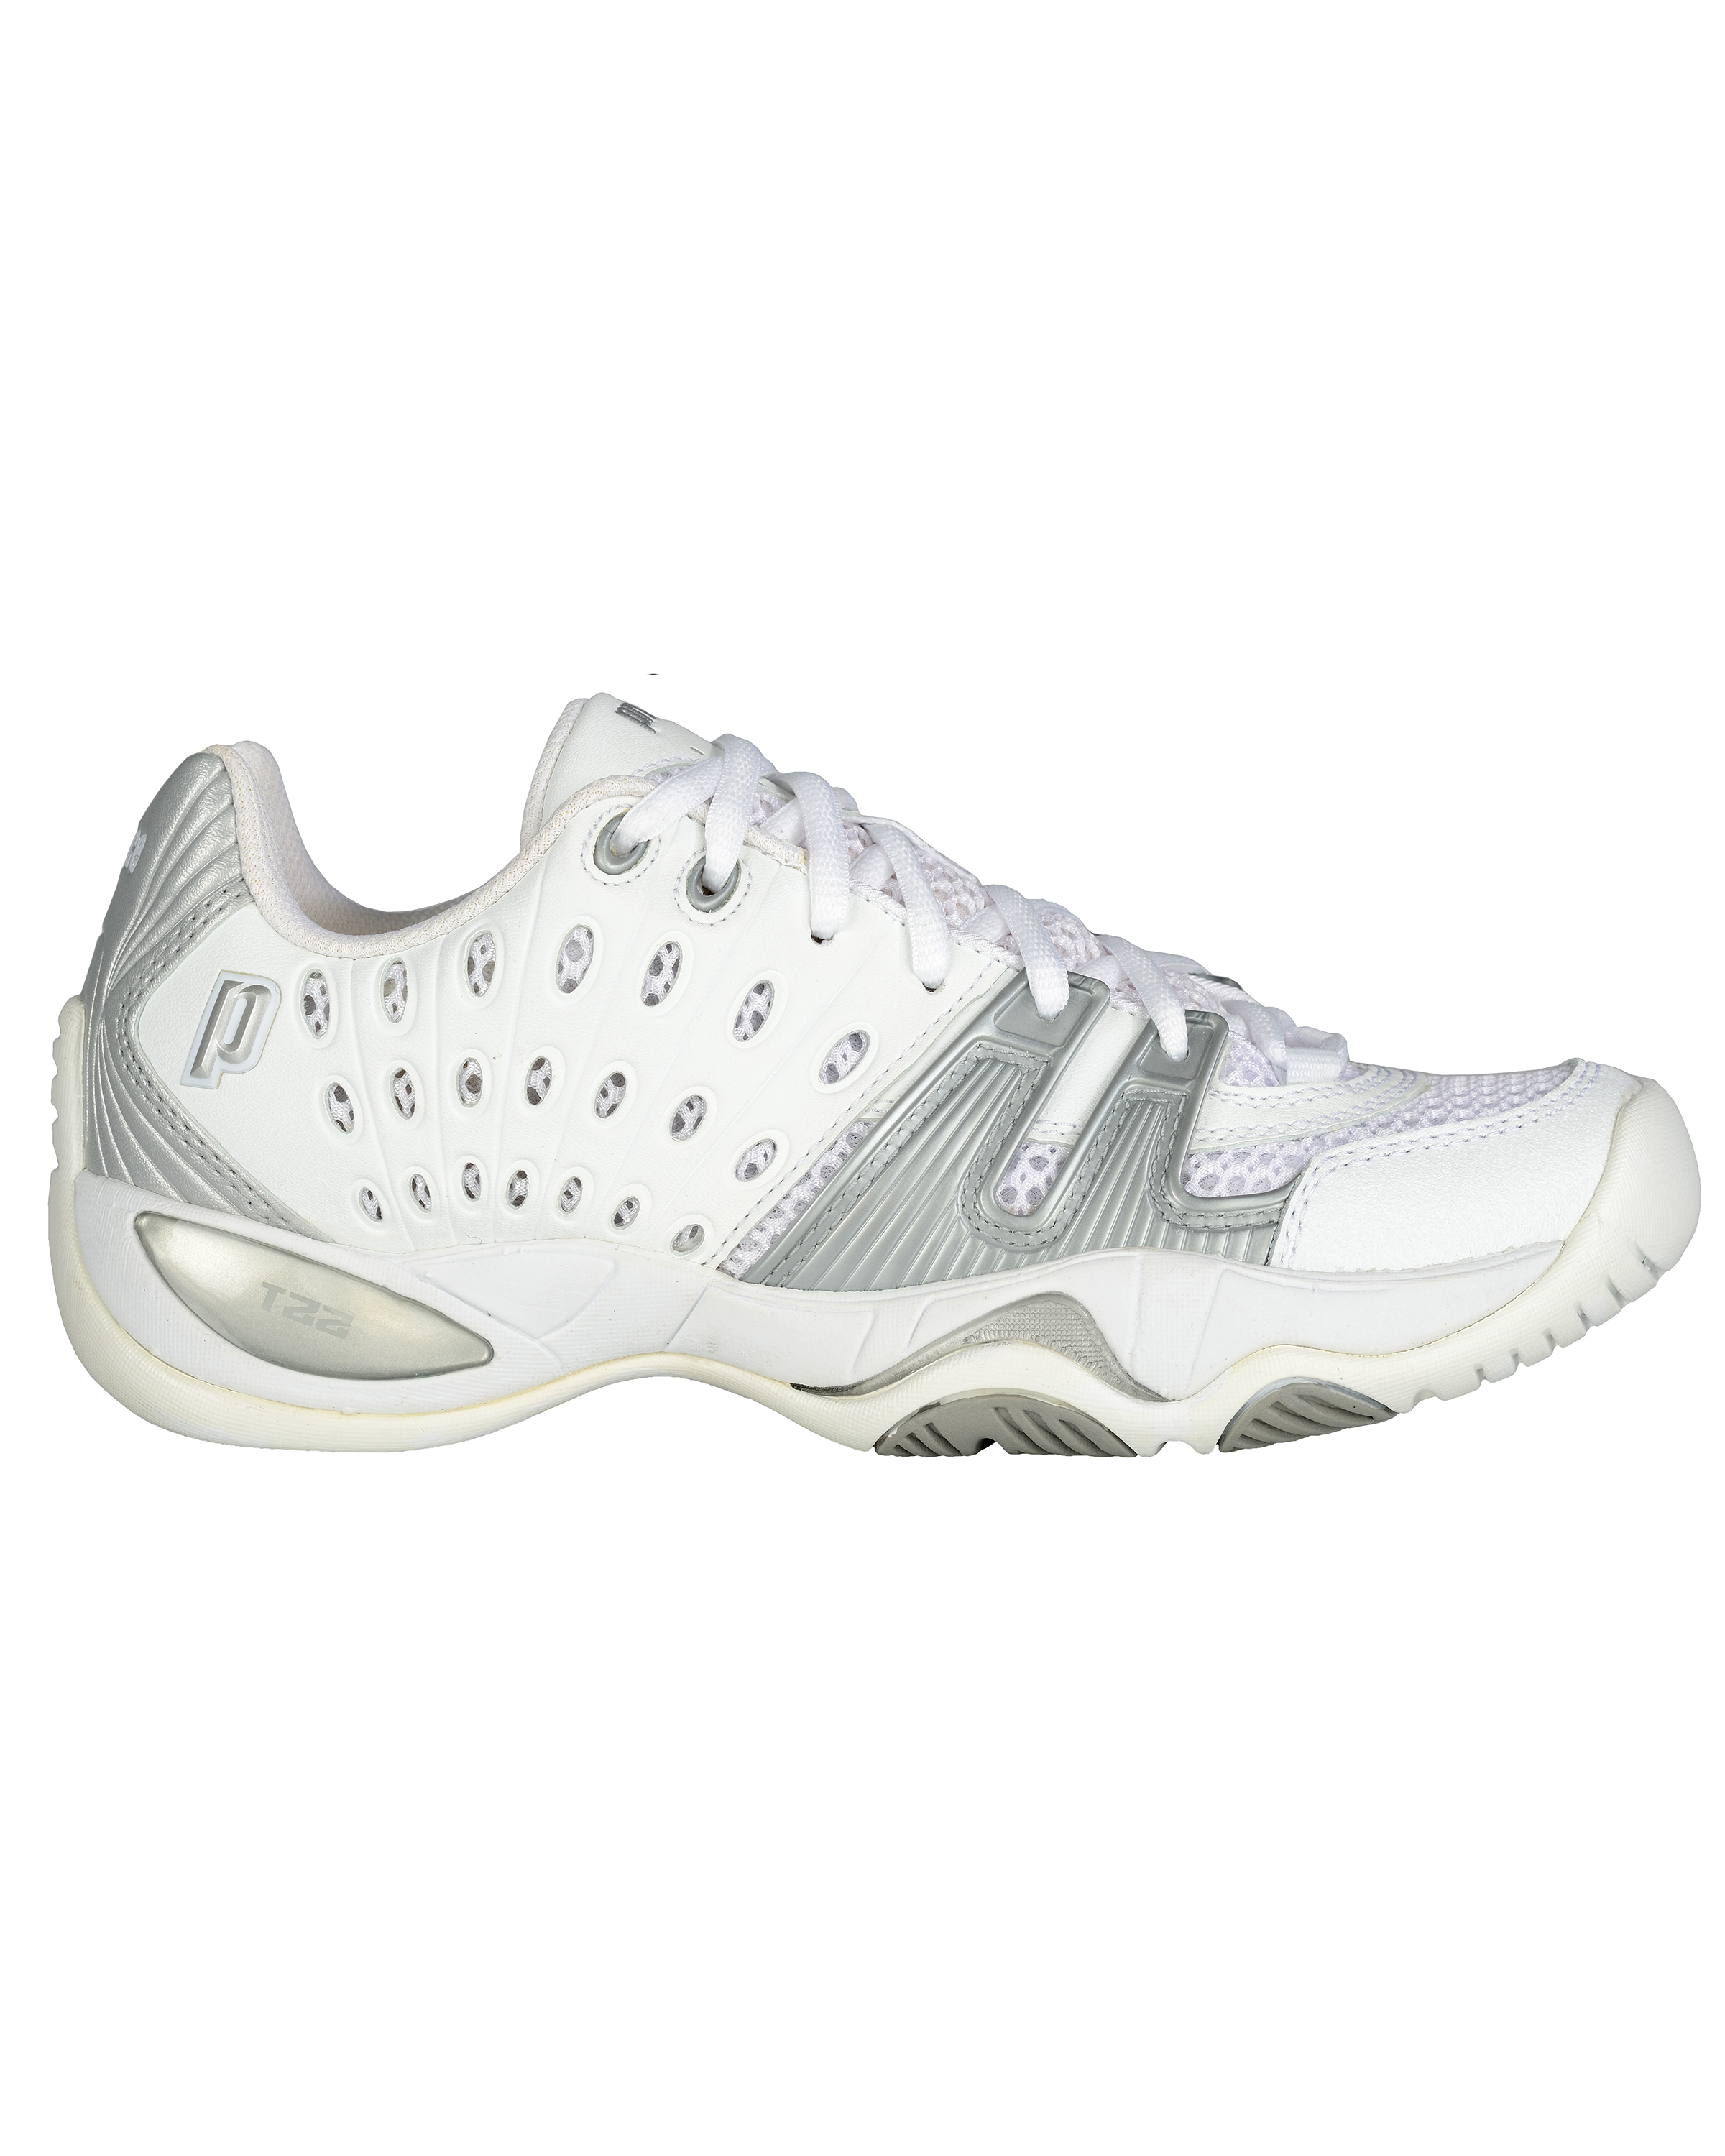 Womens T22 (White_Silver) - Lateral 8P985-862.png